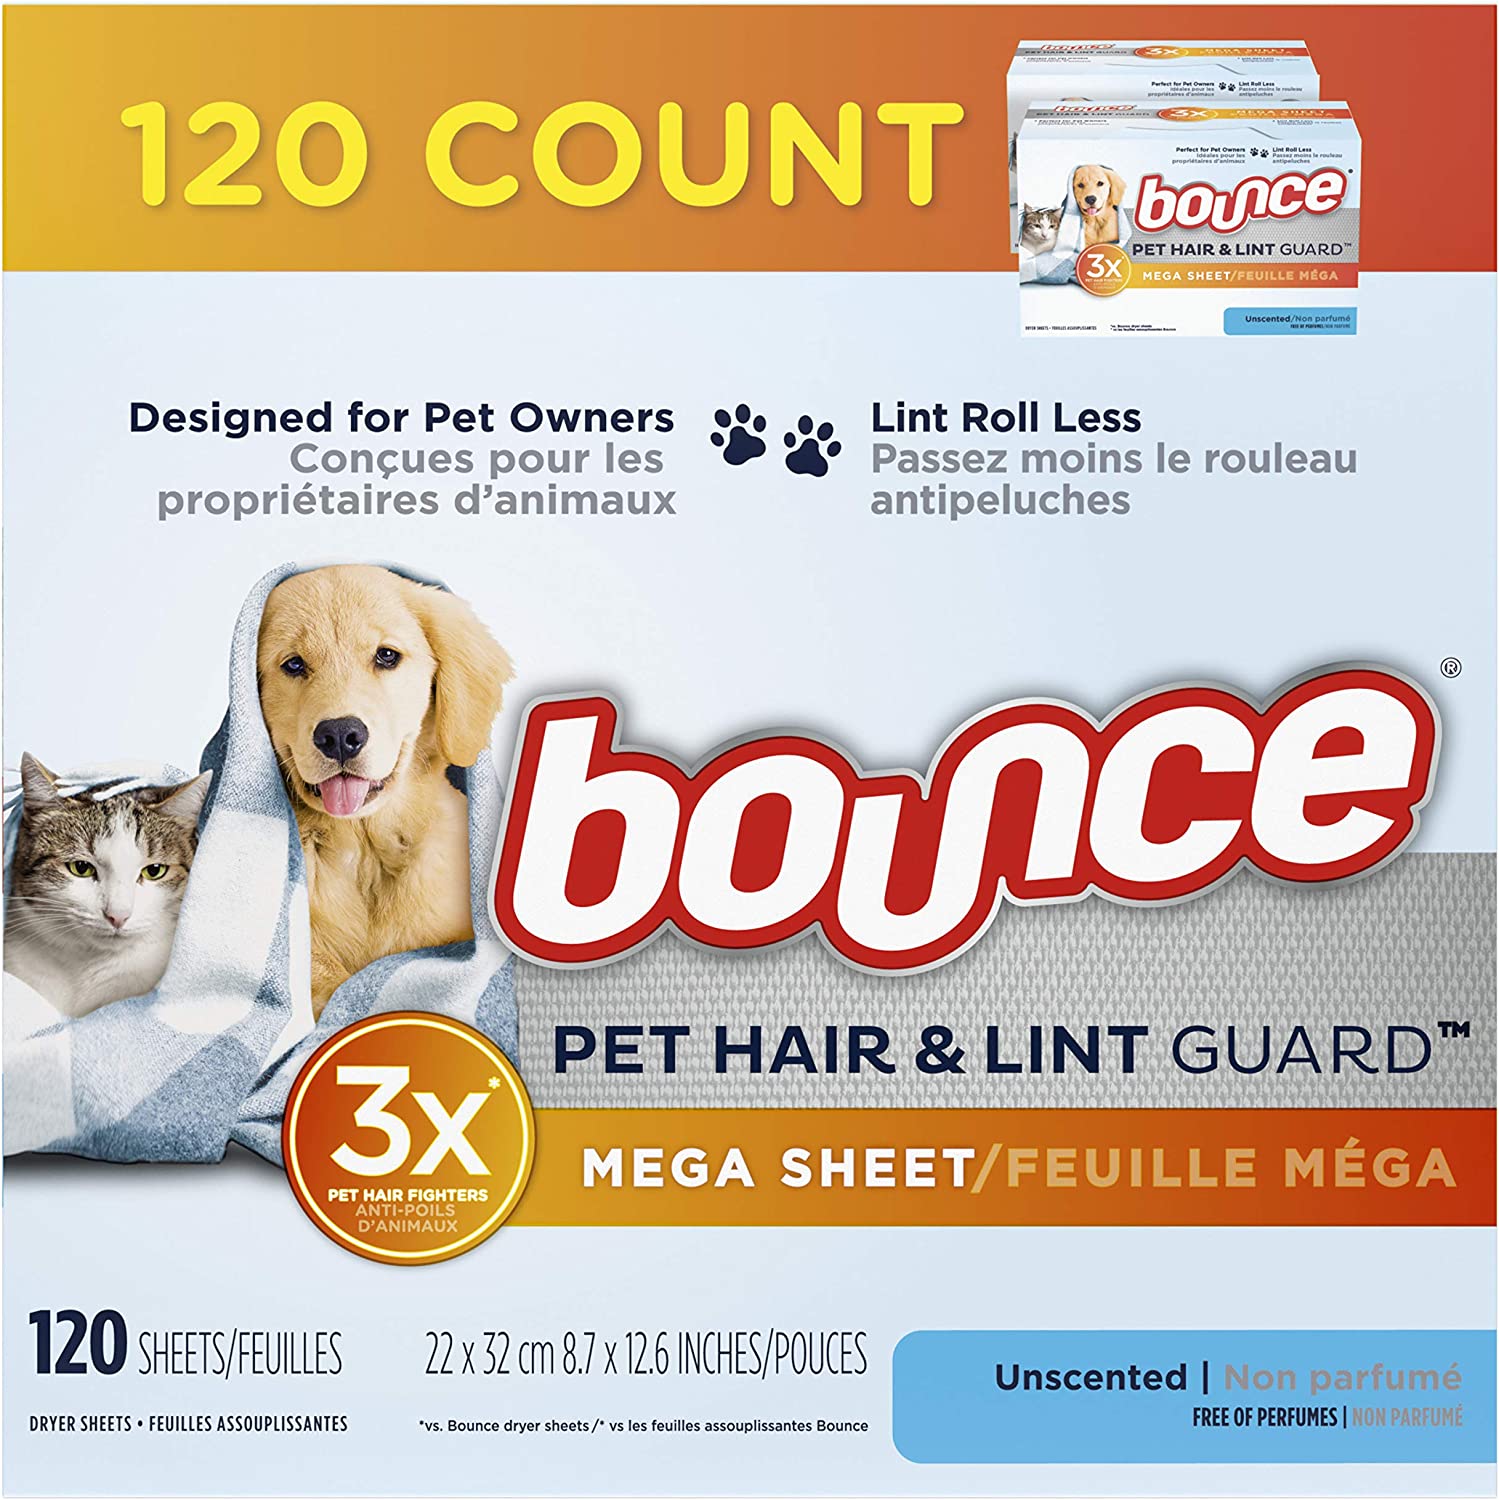 Our Favorite Products for Dog Owners: Bounce Pet Hair & Lint Guard